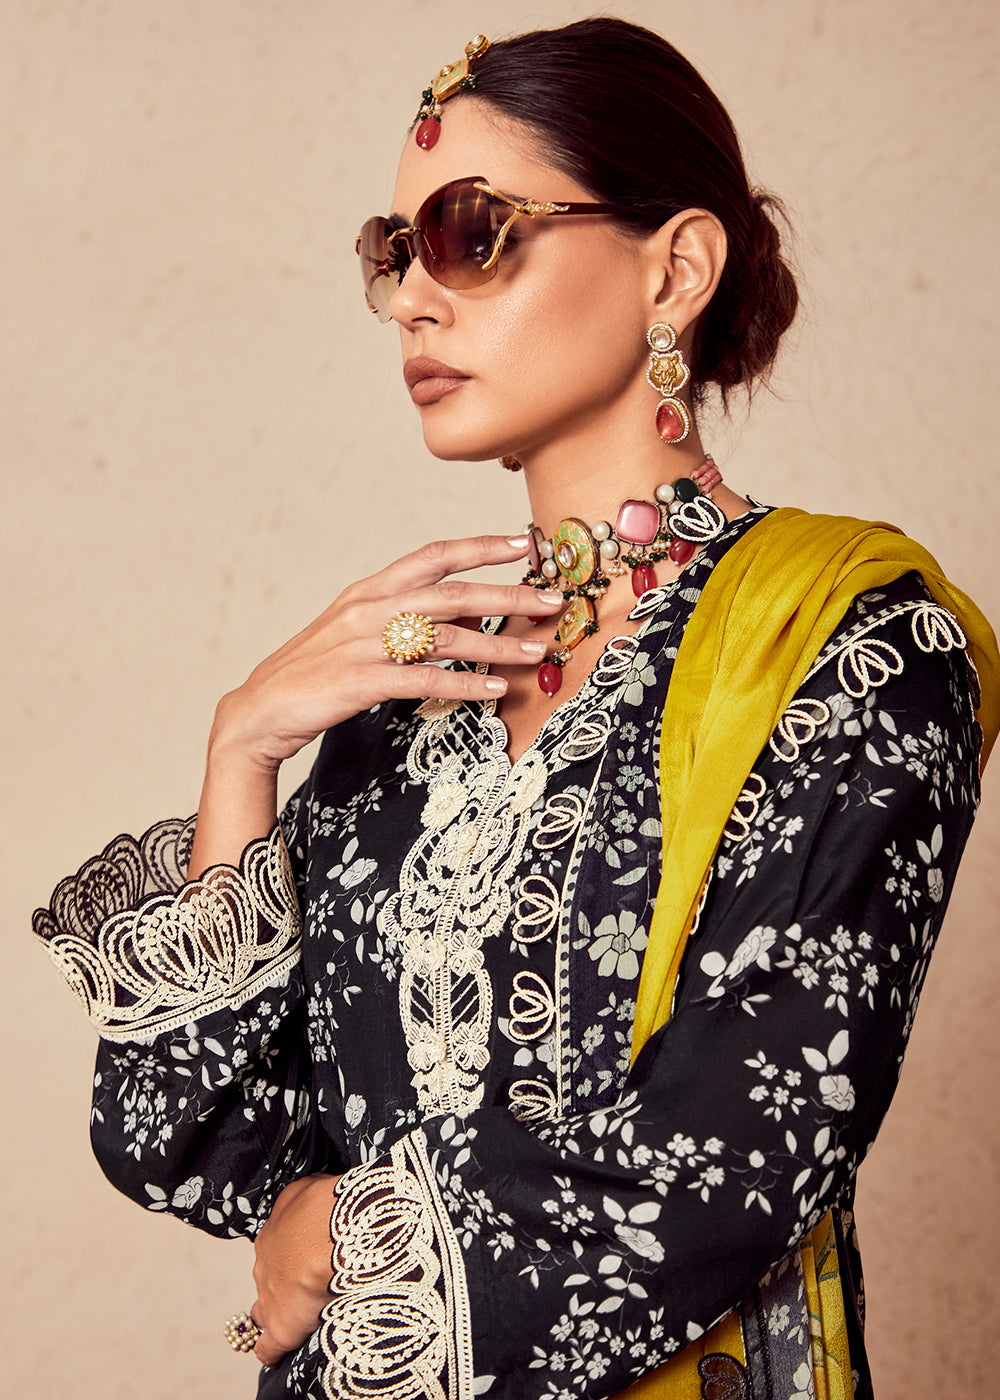 Buy Now Black Muslin Cotton Digital Print & Embroidered Salwar Suit Online in USA, UK, Canada, Germany, Australia & Worldwide at Empress Clothing. 